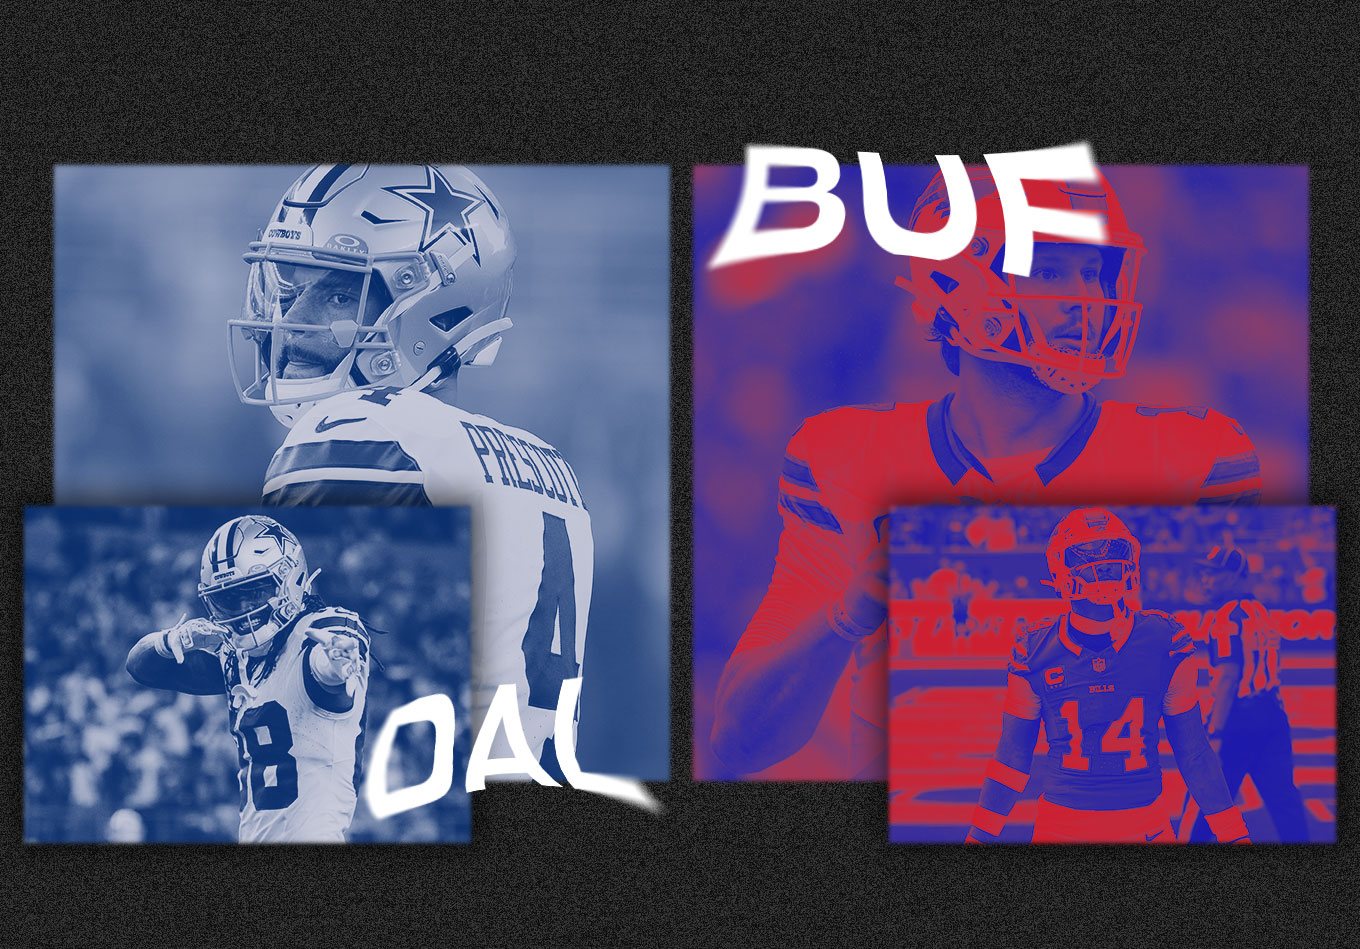 Cowboys vs Bills Prediction: Now in First Place, Dallas Looks to Stay Hot at Buffalo